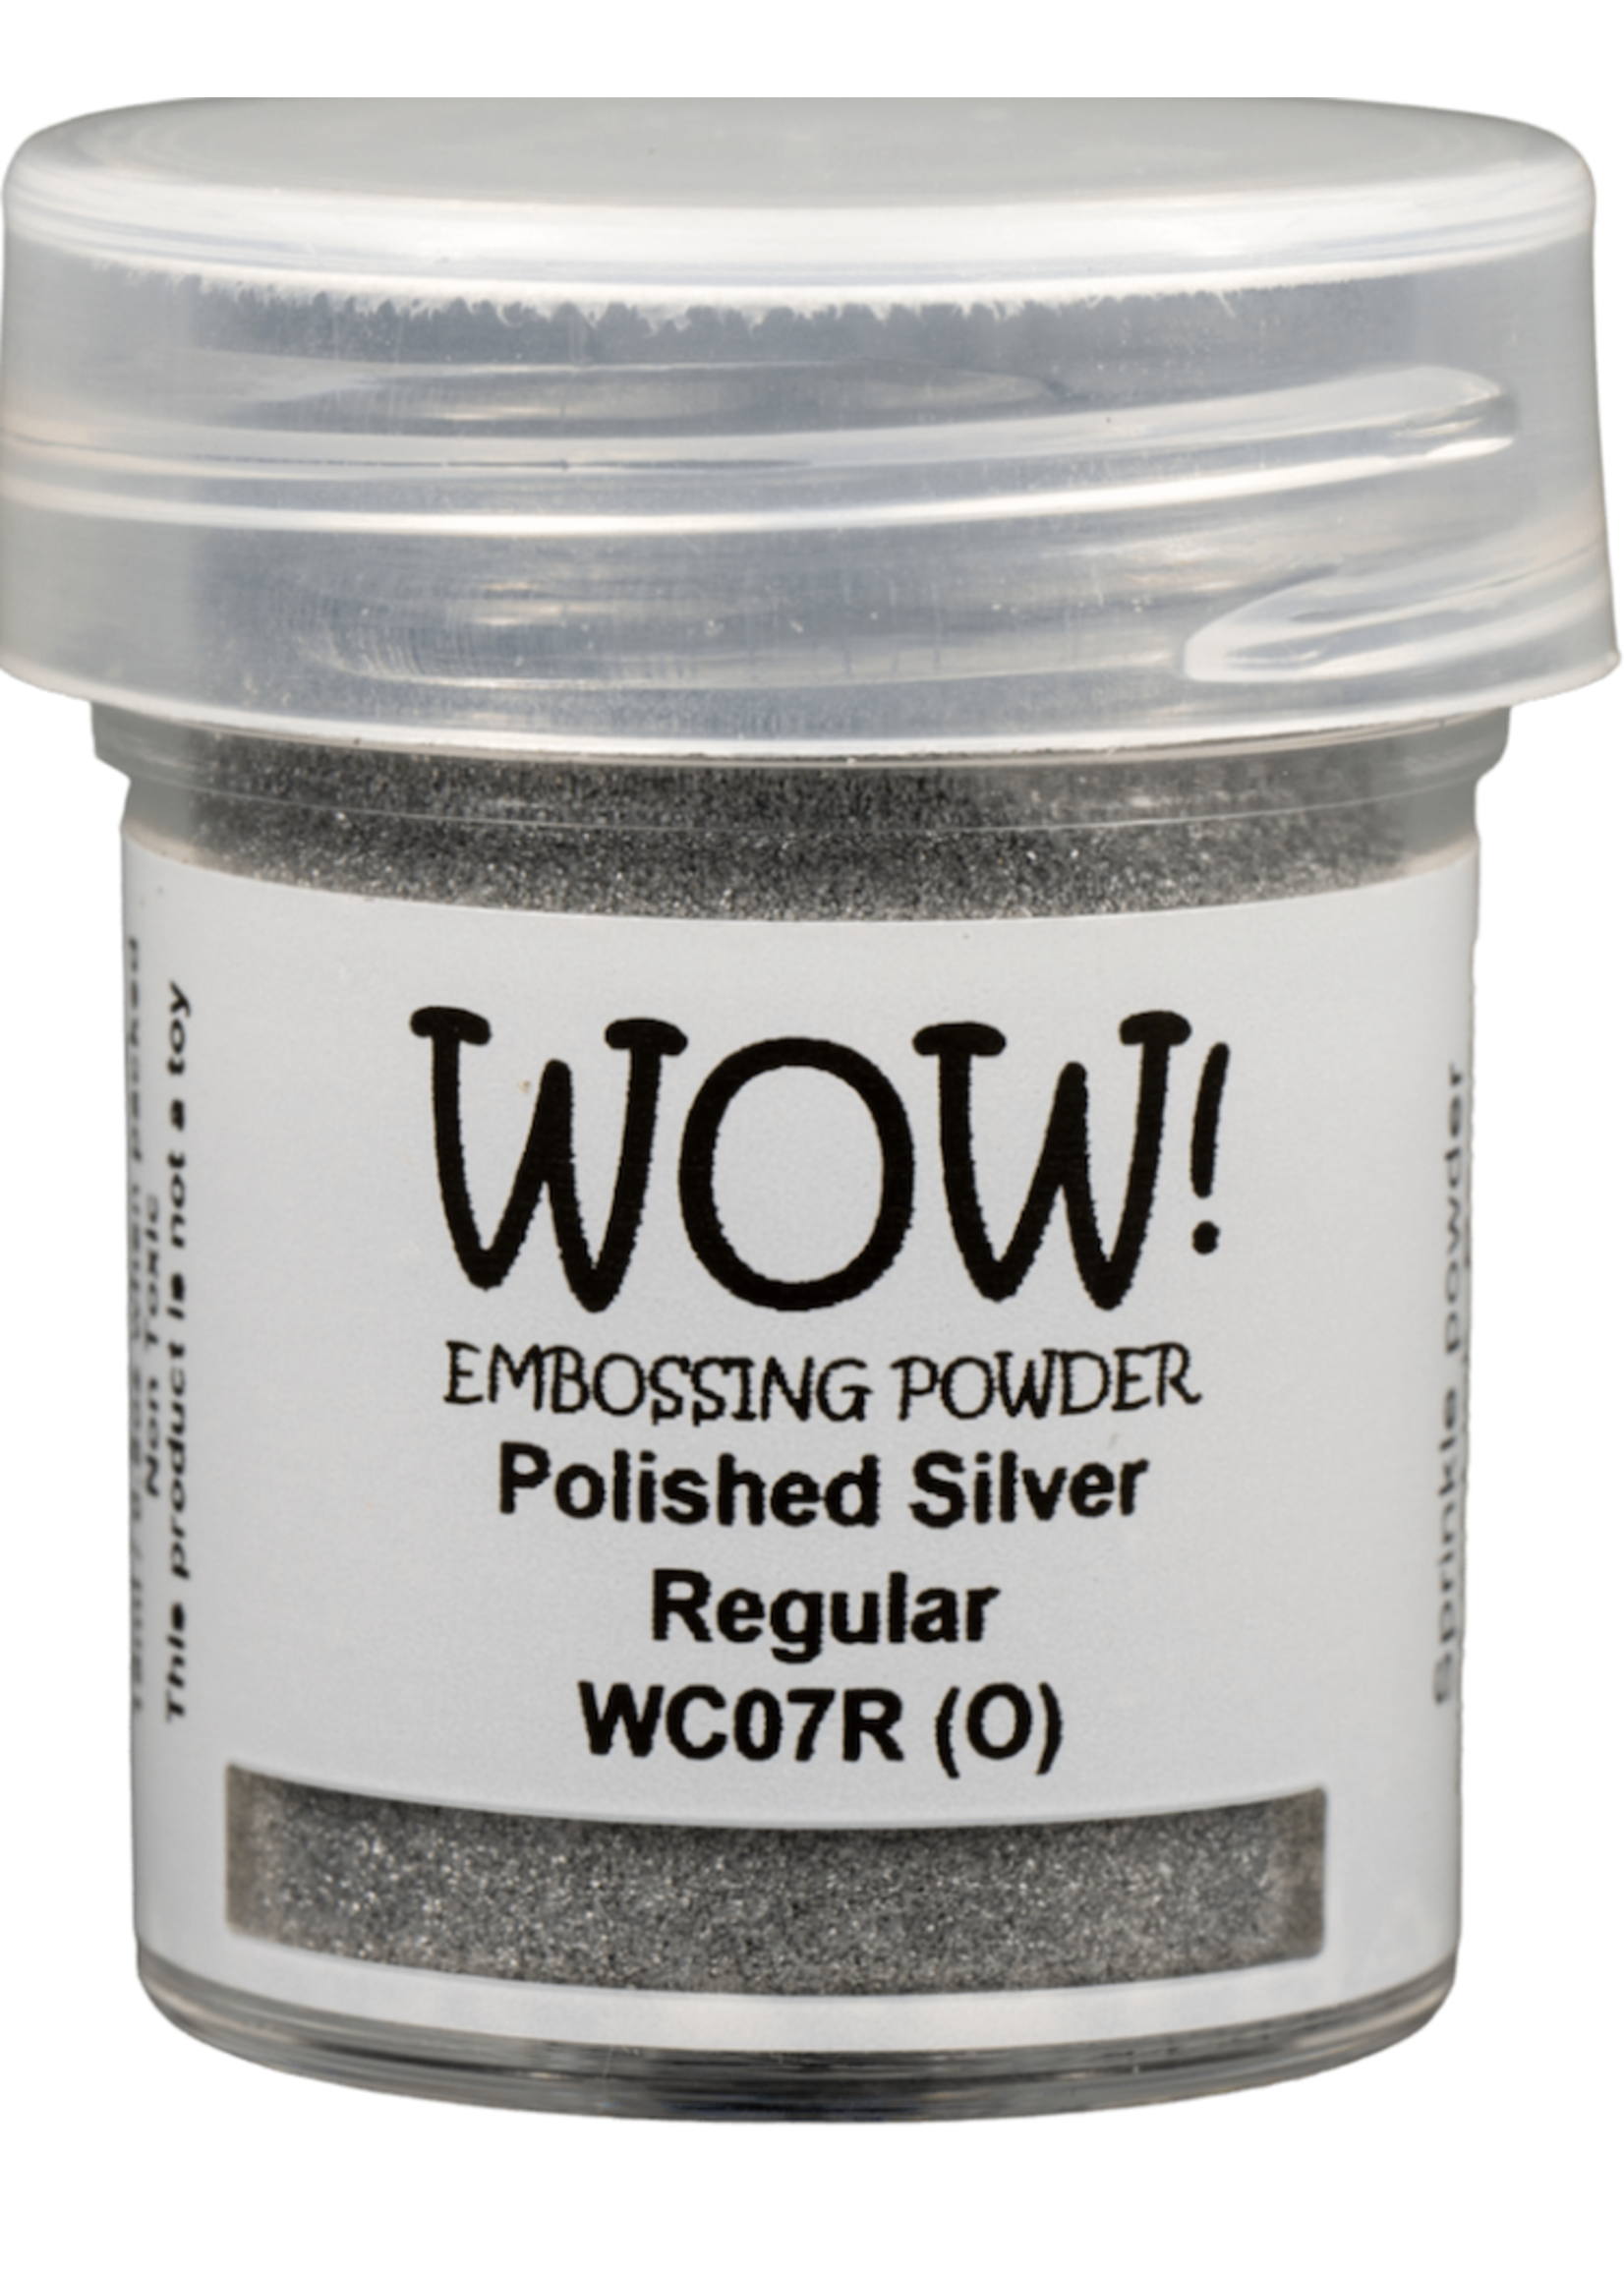 wow! Wow! Embossing Powder (O) Polished Silver